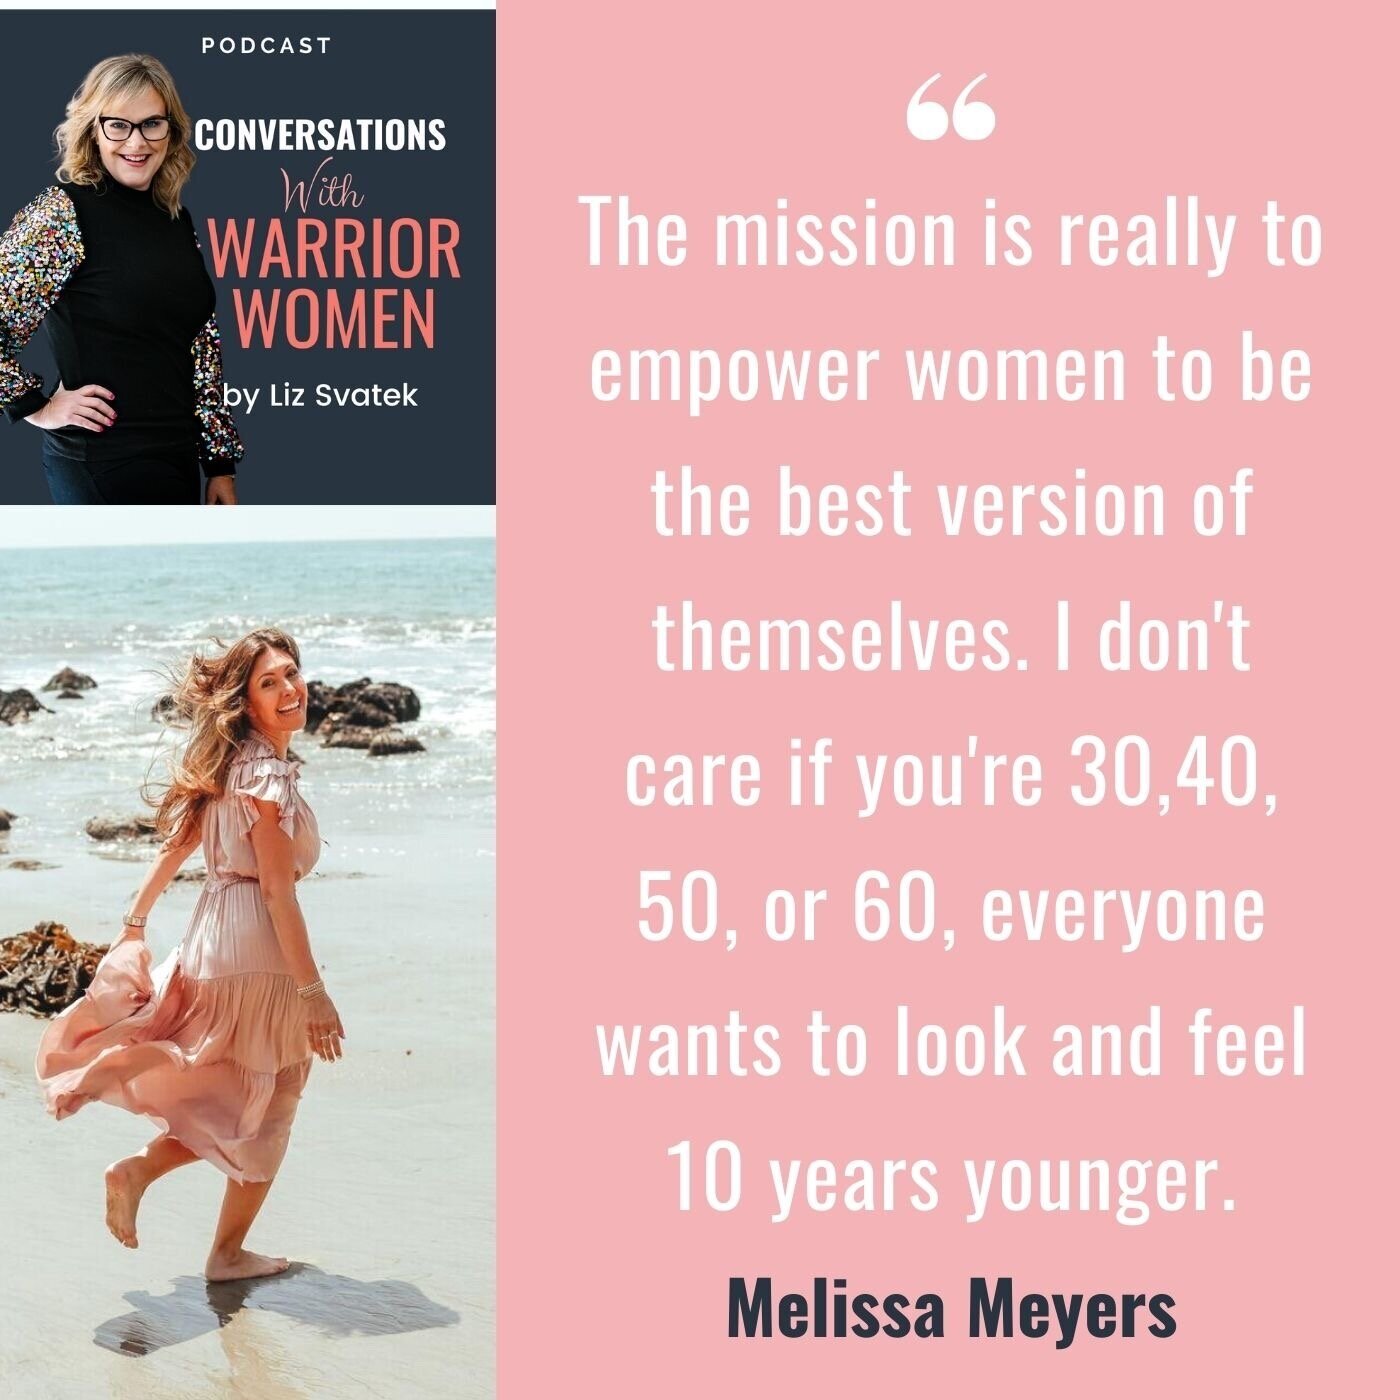 Podcast: Conversations With Warrior Women